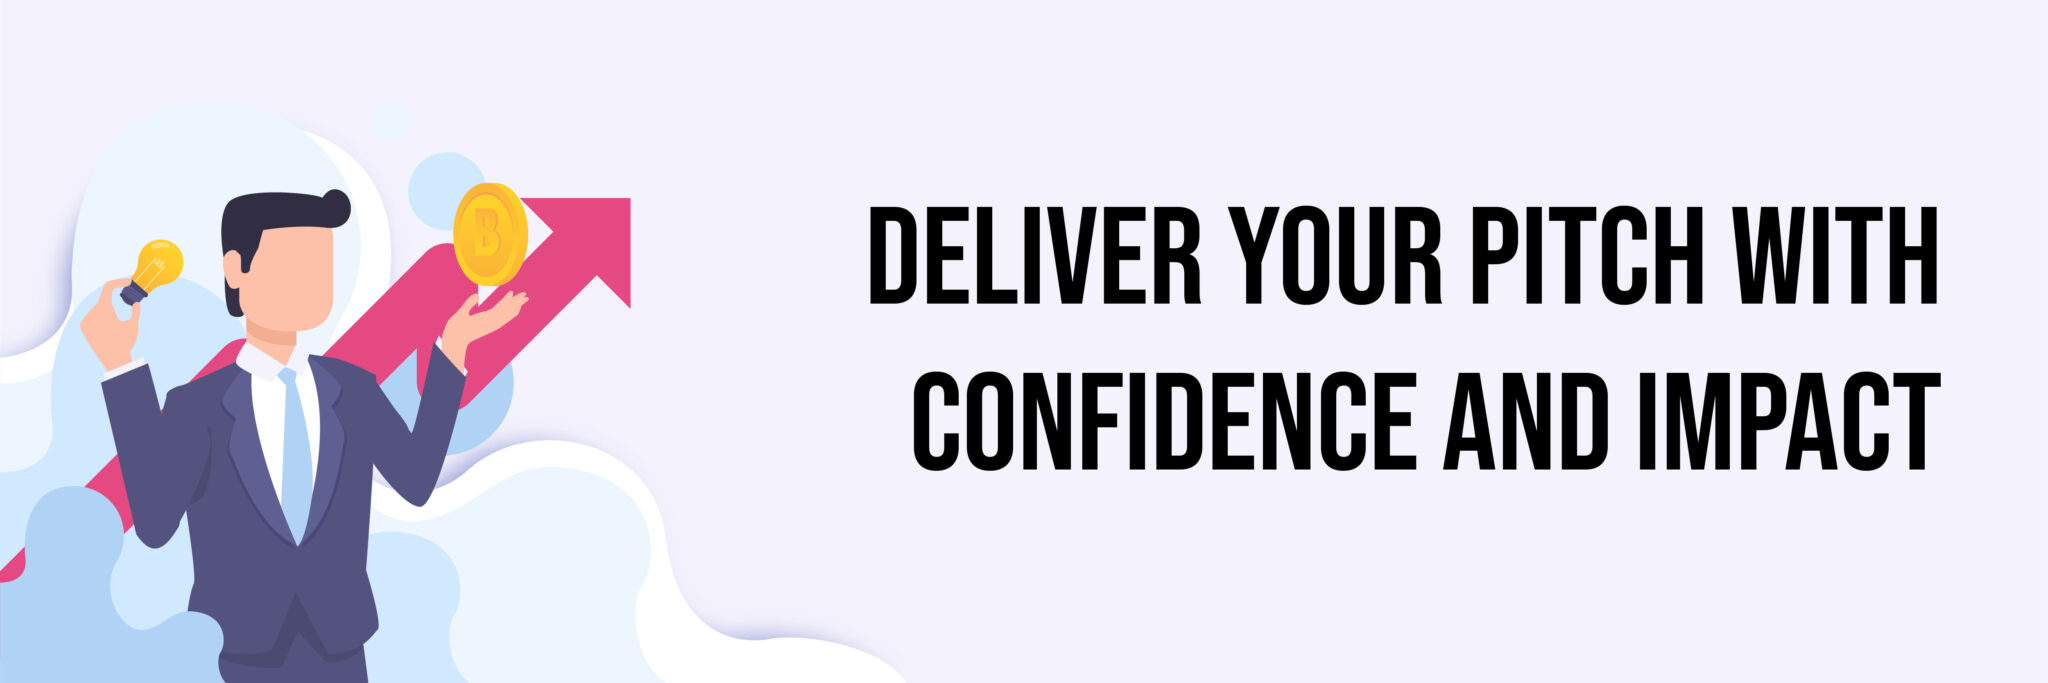 Deliver Your Pitch with Confidence and Impact